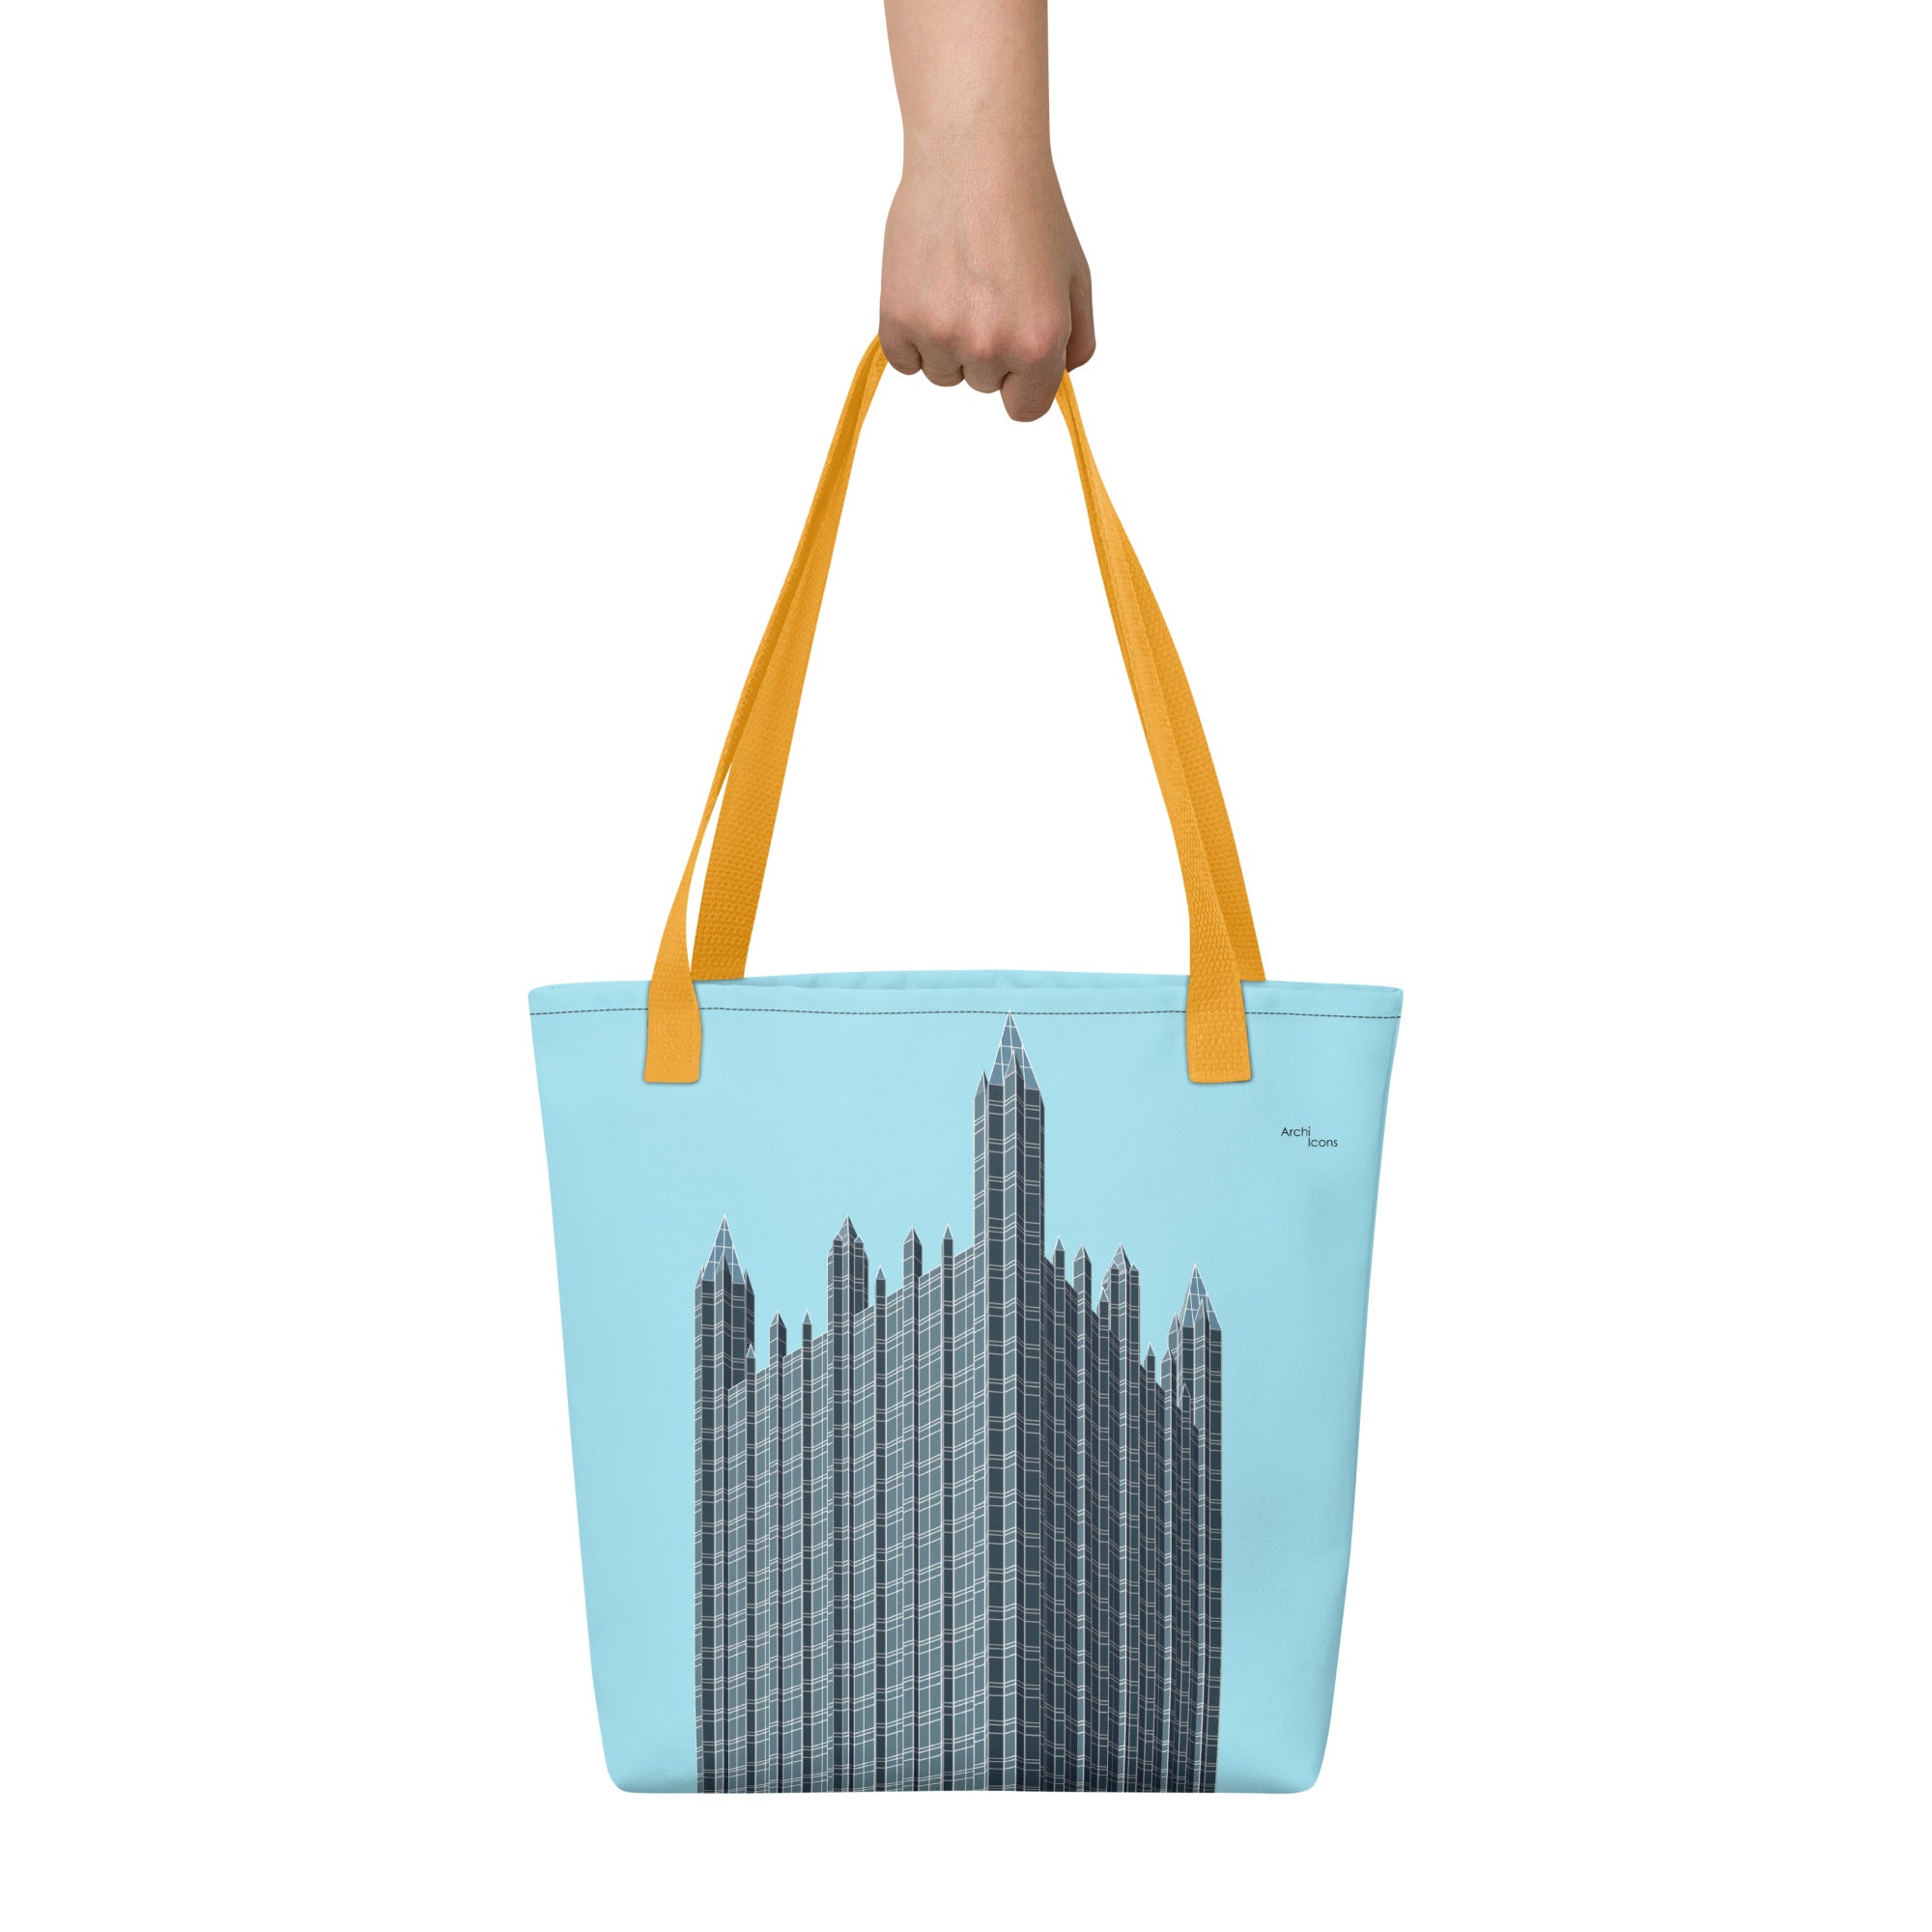 PPG Place Tote Bags